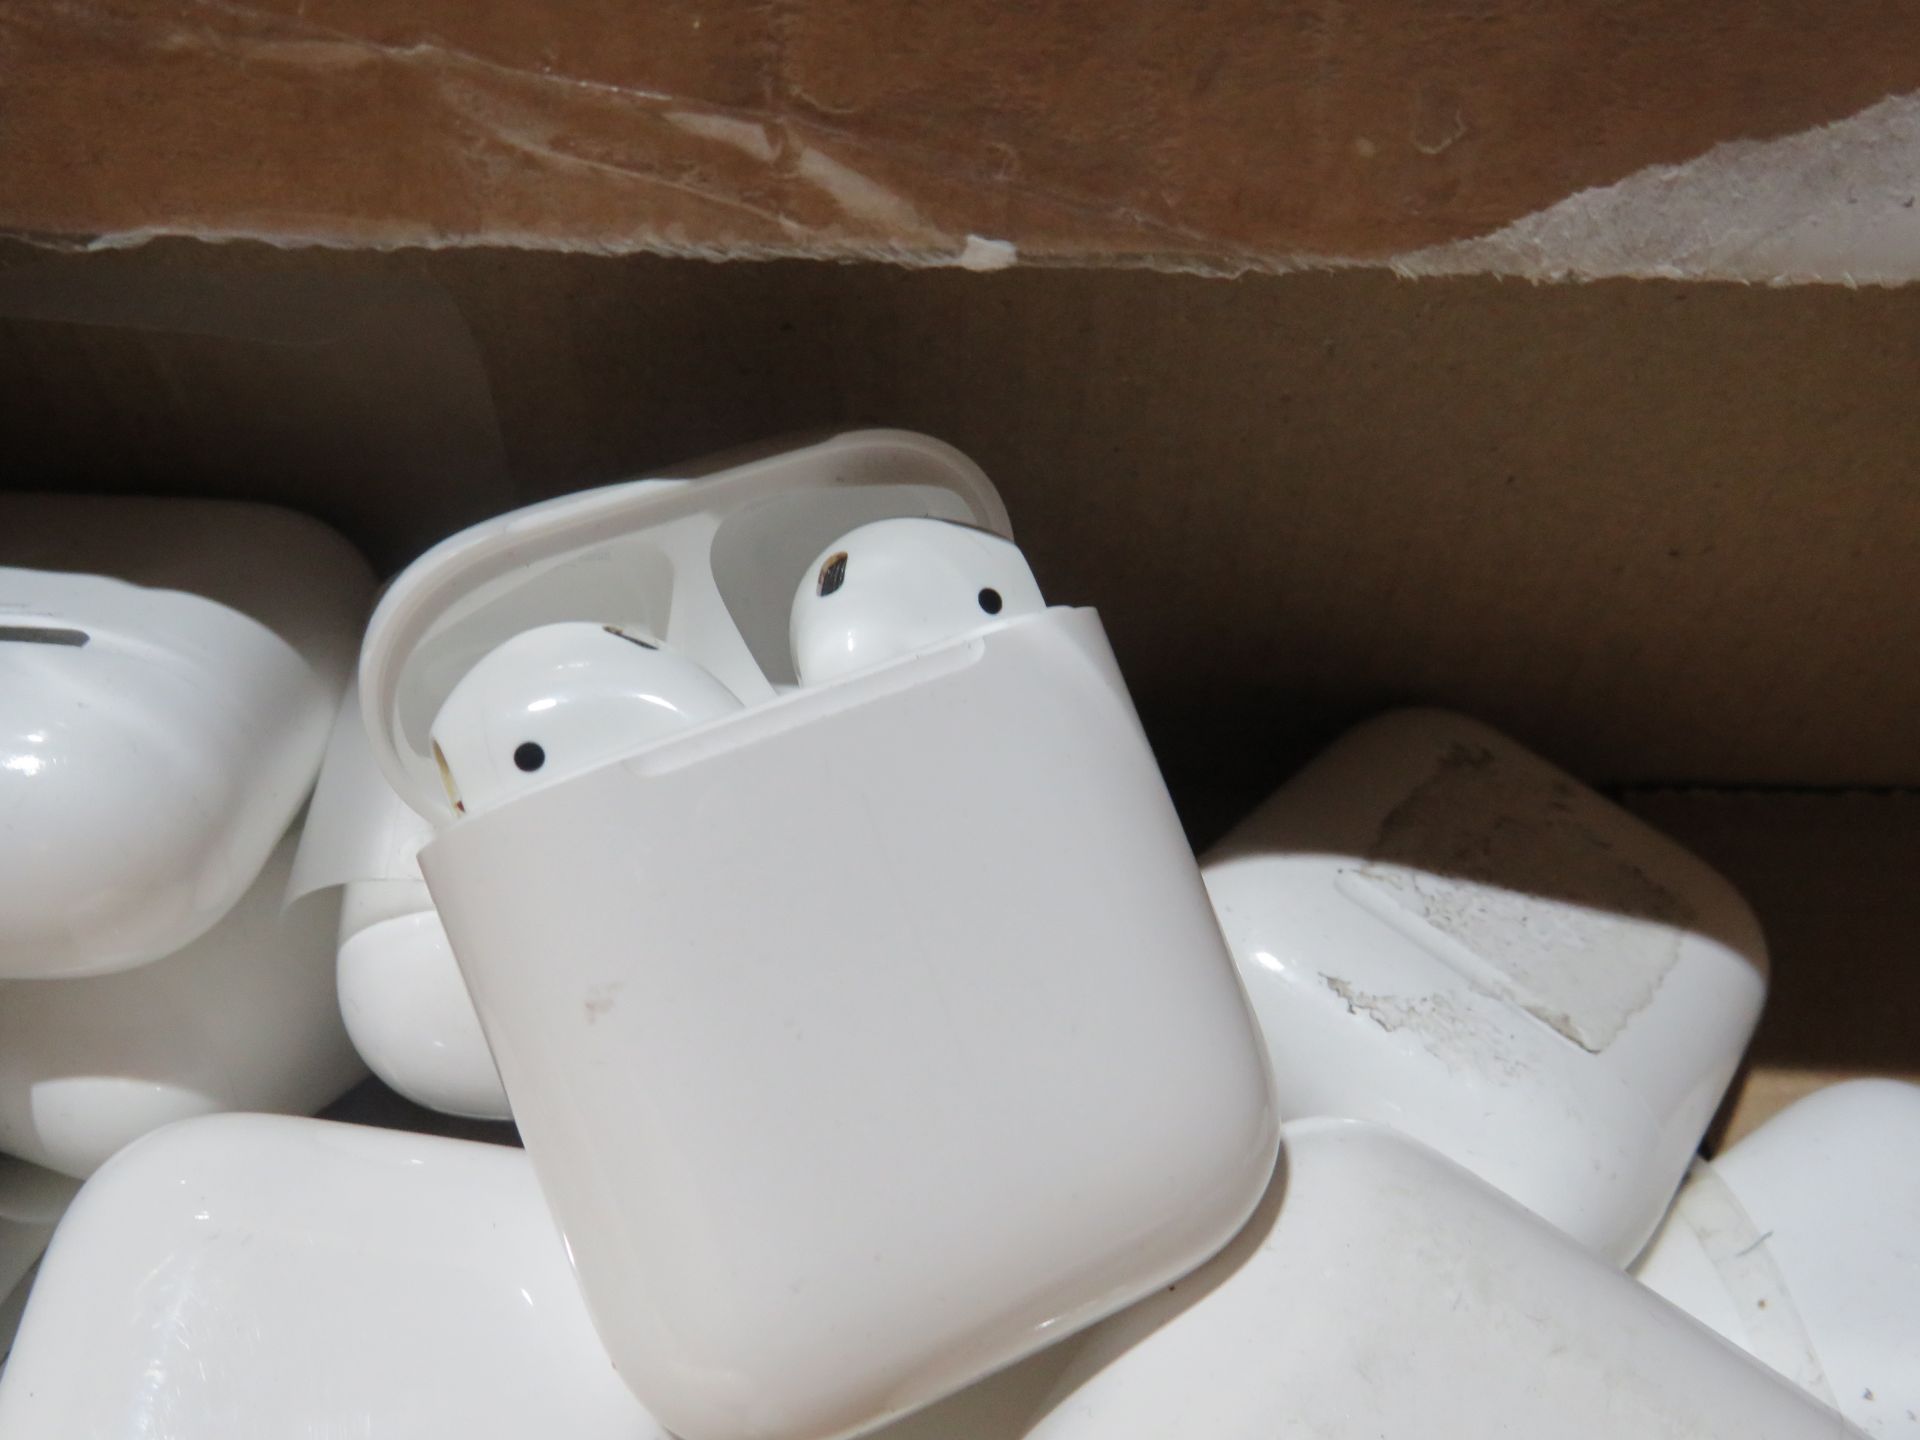 Apple air pods, these are completely unchecked returns they all have 2 air pods and a charging